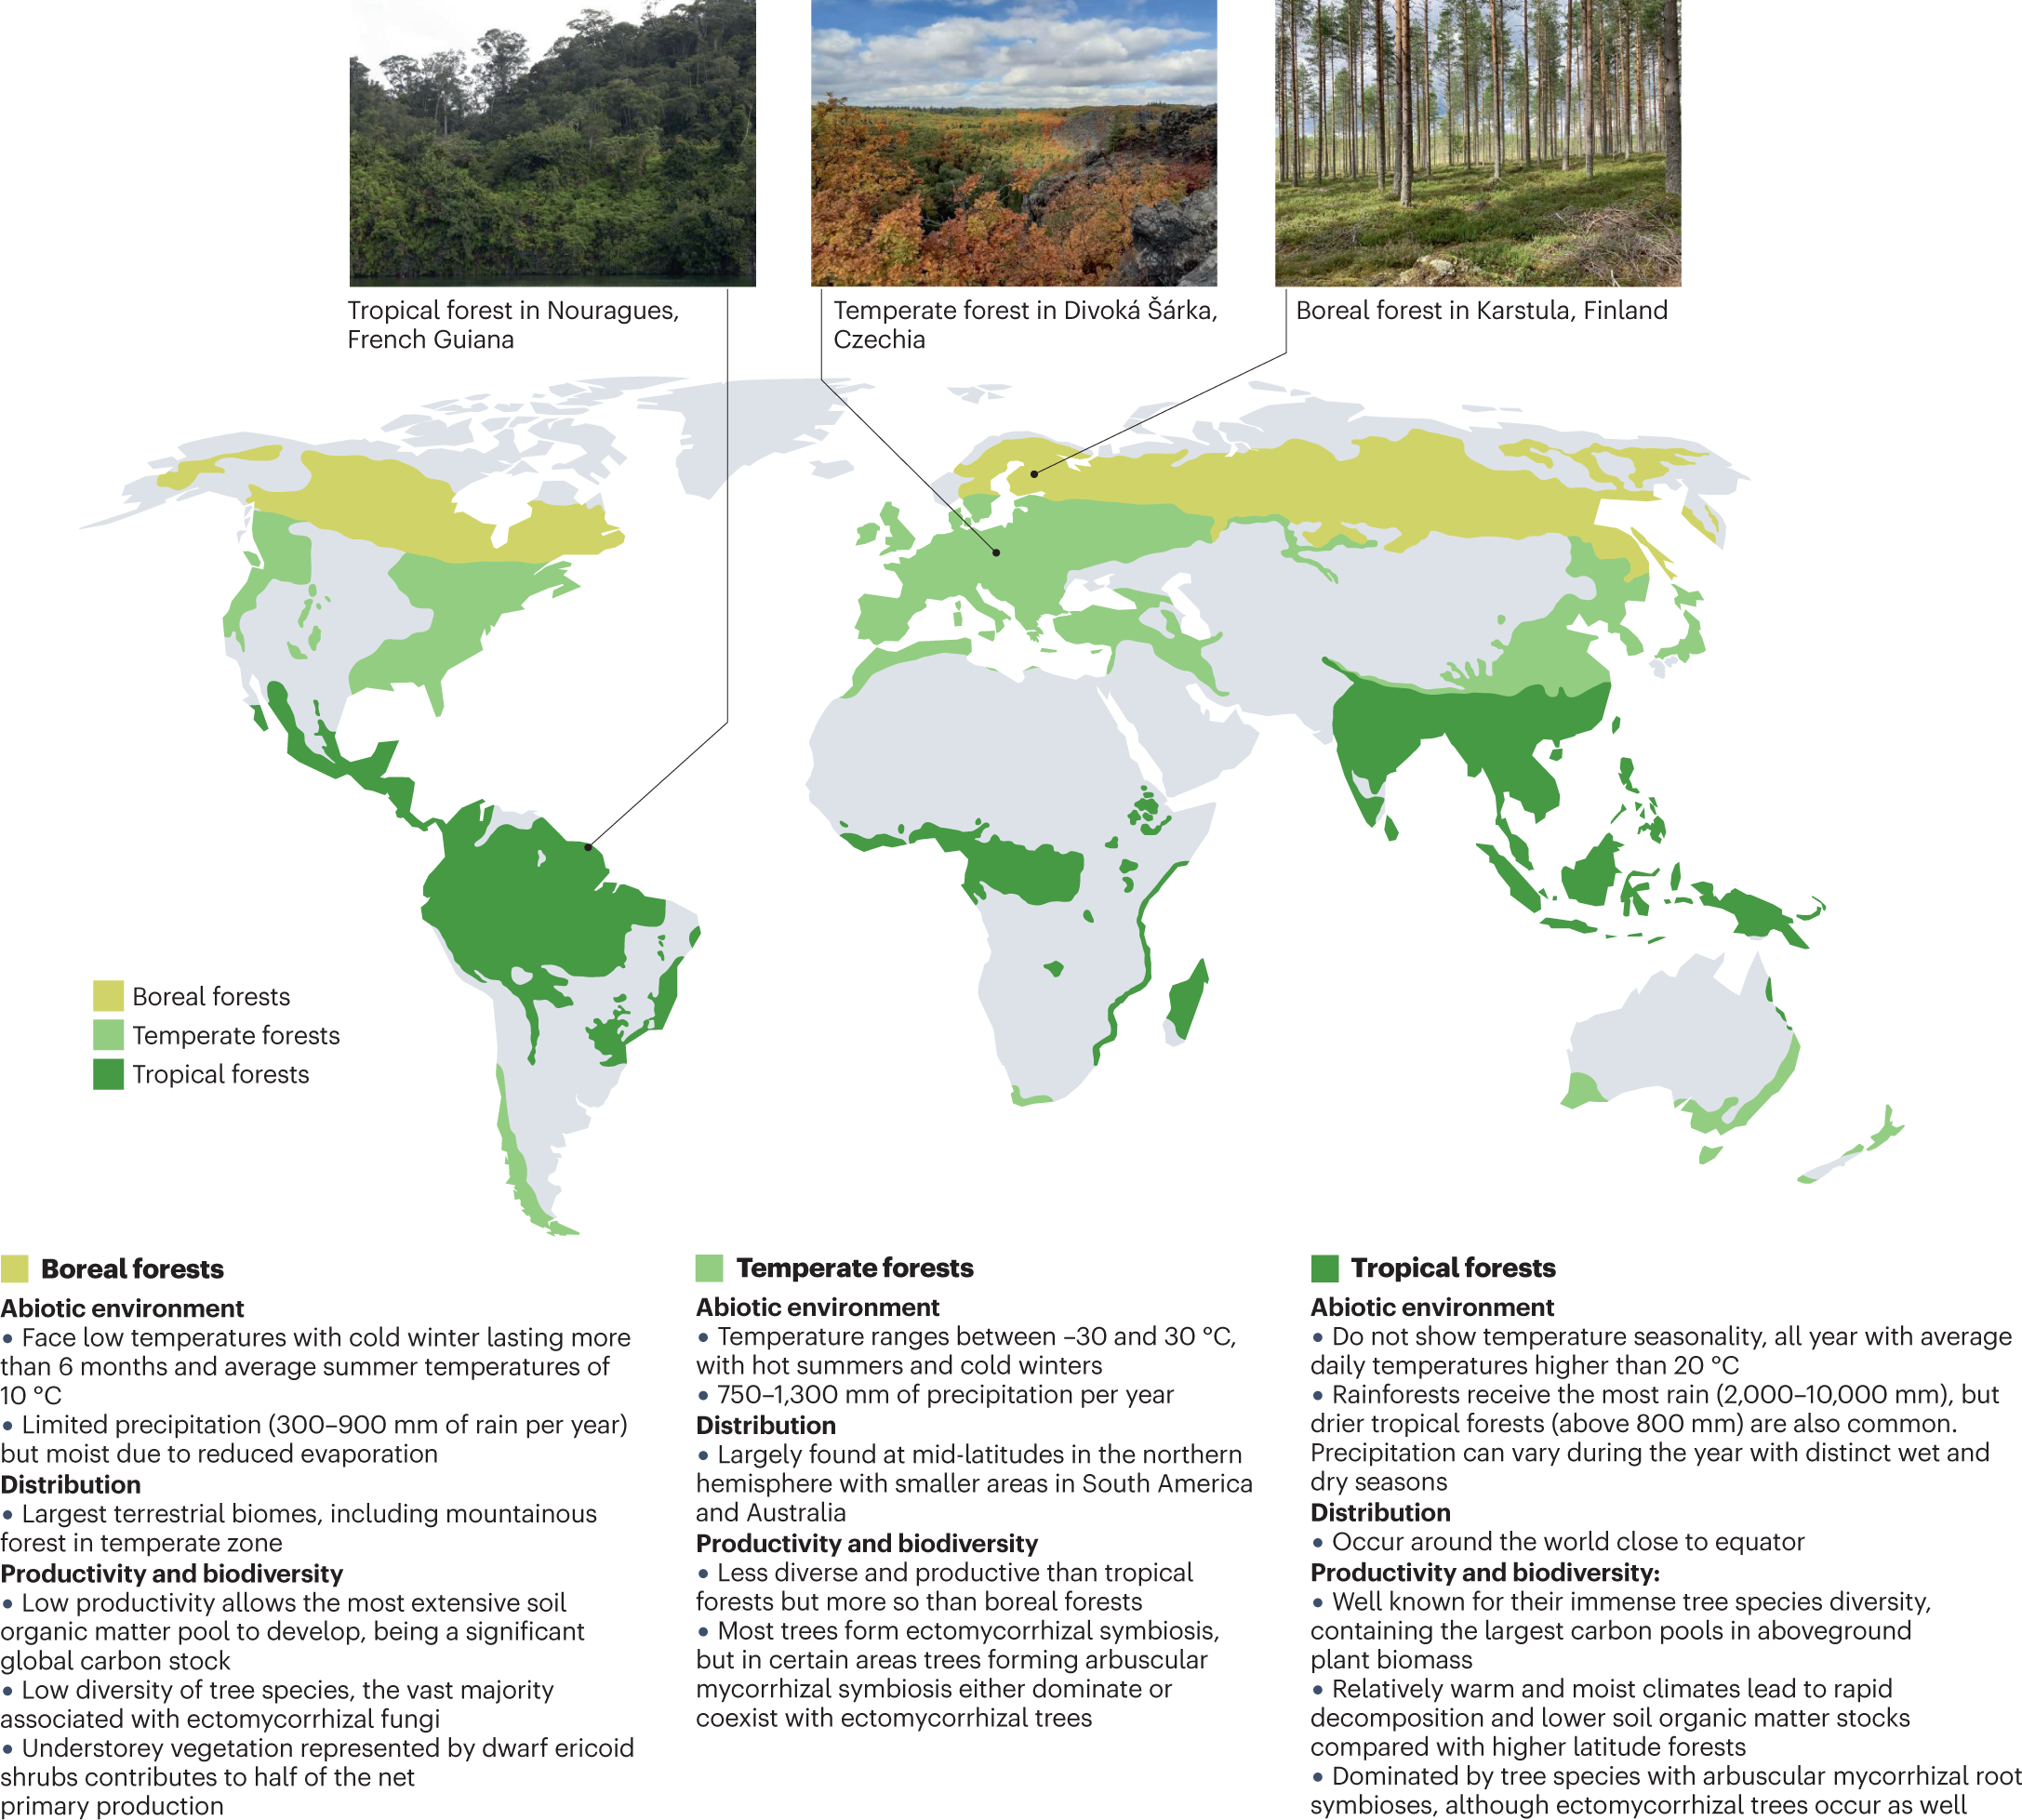 Under The Oak Tree Ch 34 Forest microbiome and global change | Nature Reviews Microbiology